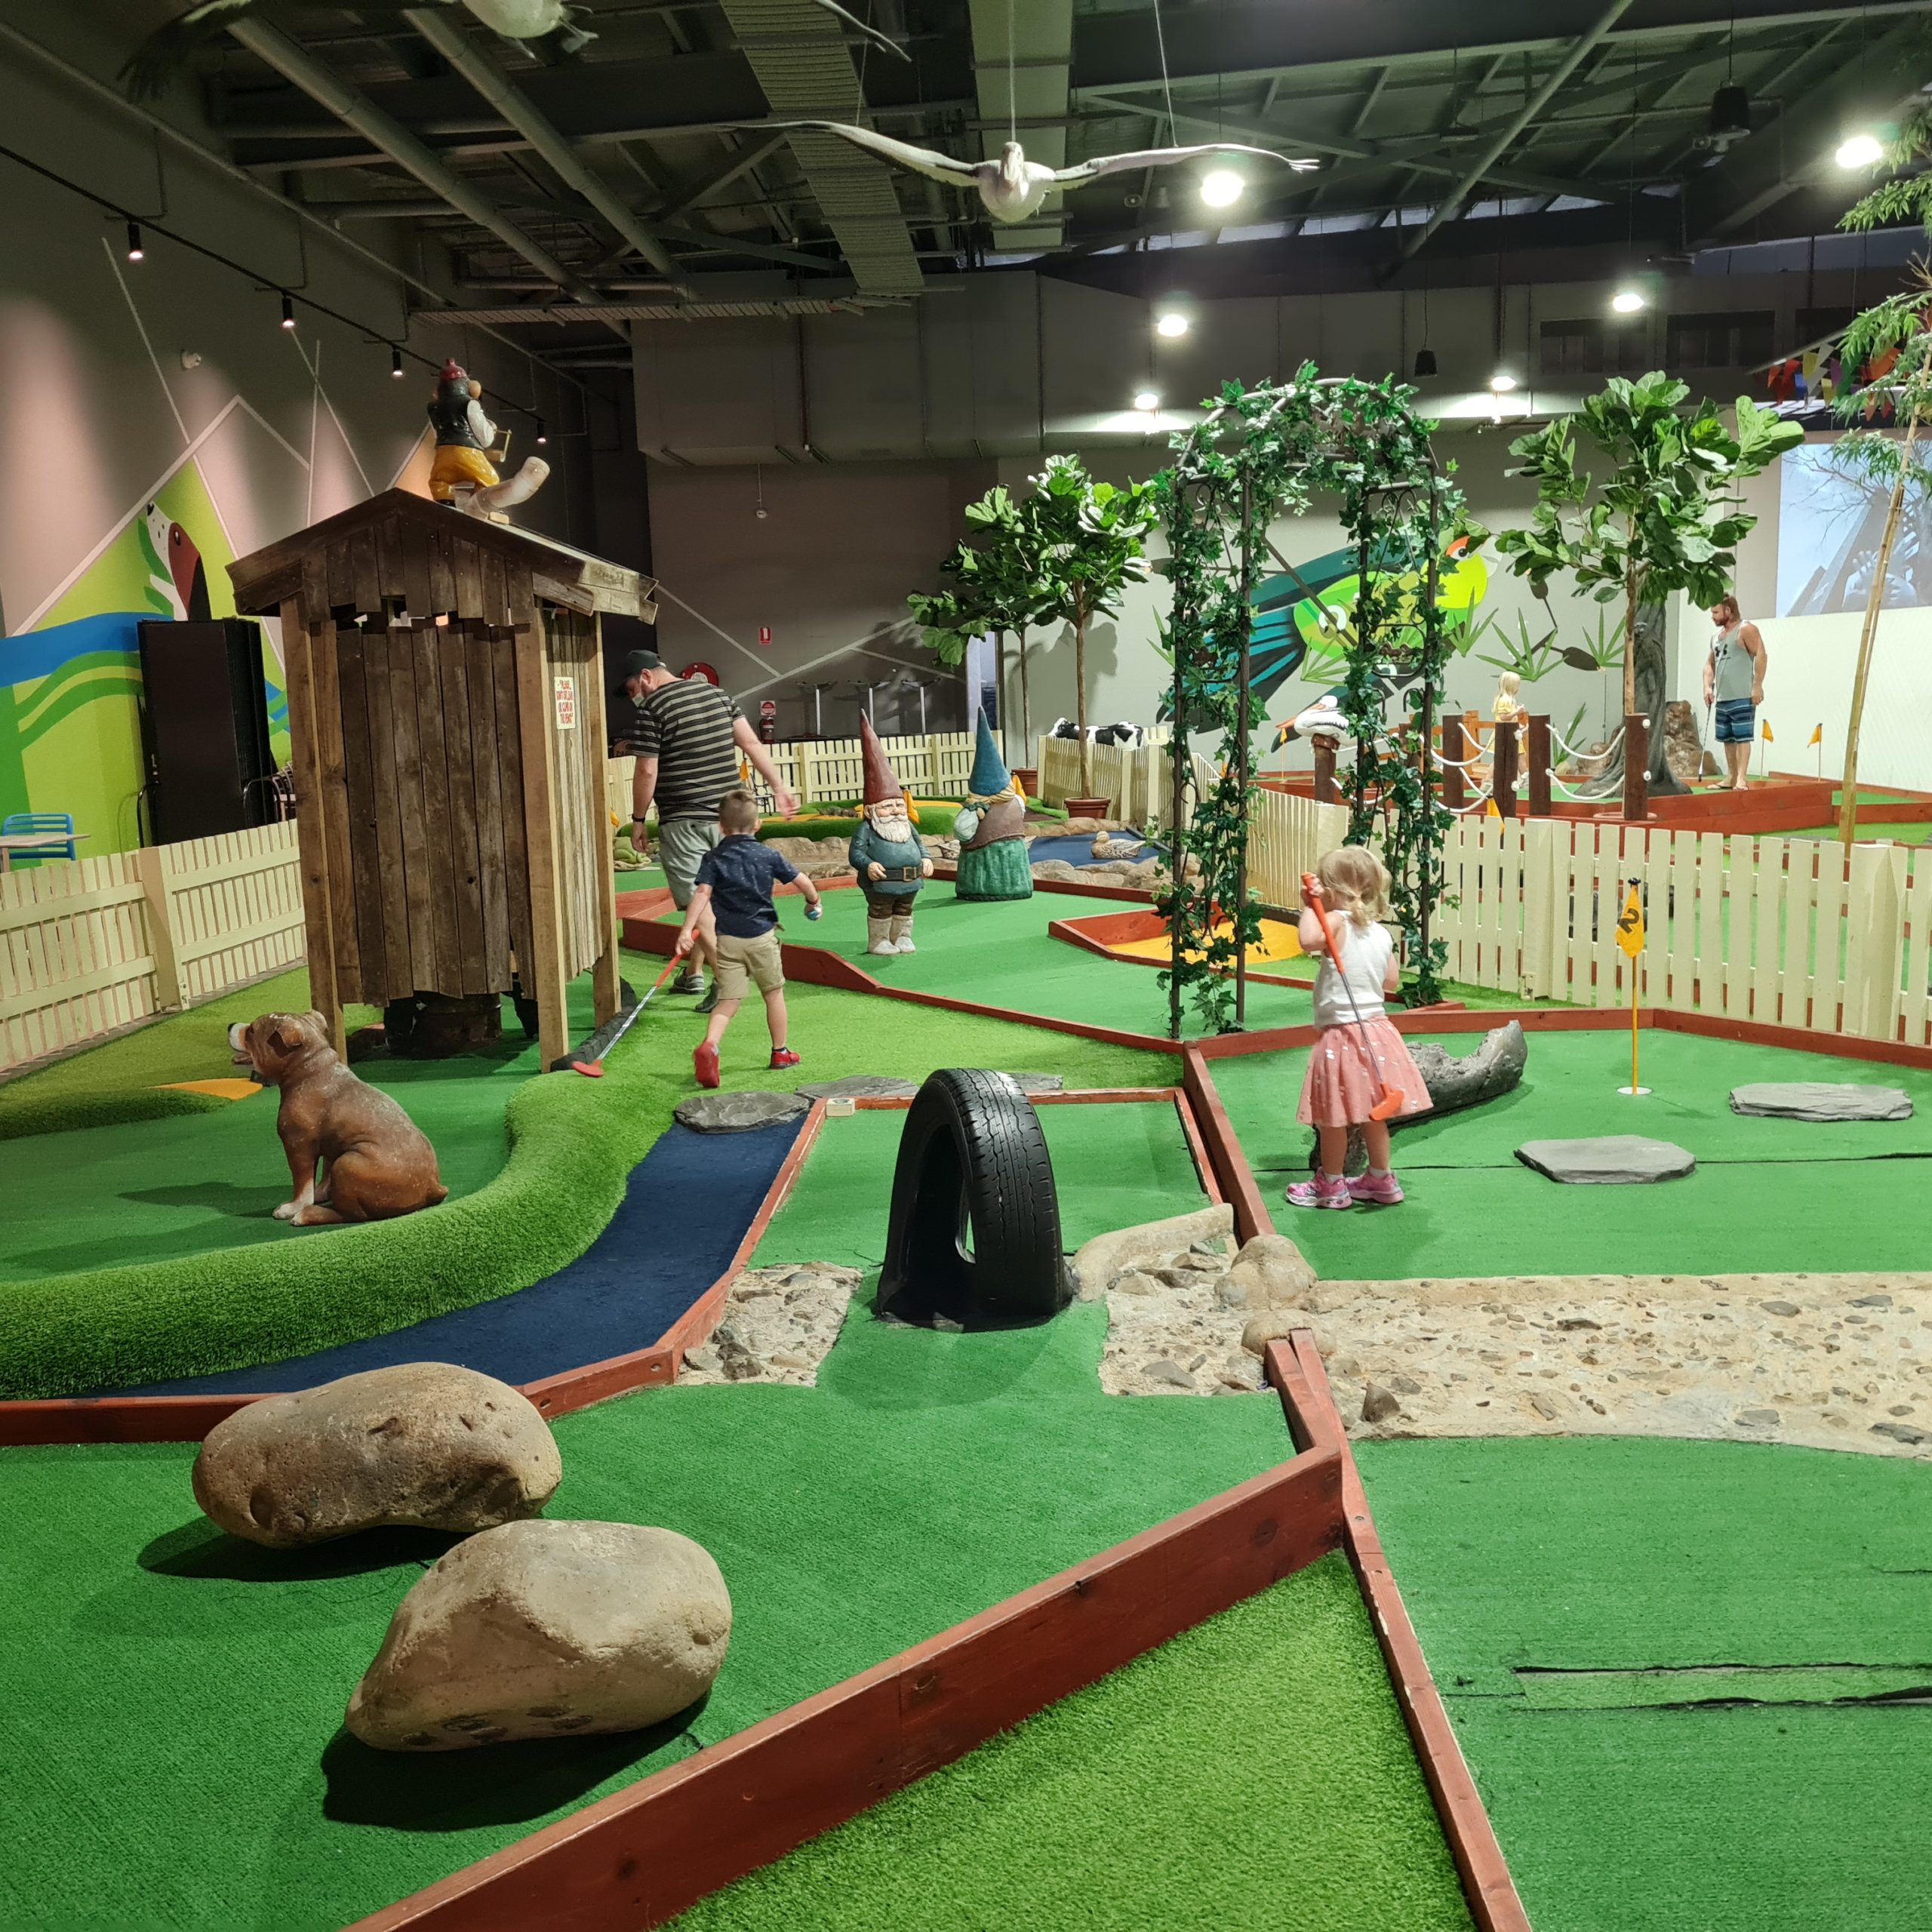 kids birthday party venues